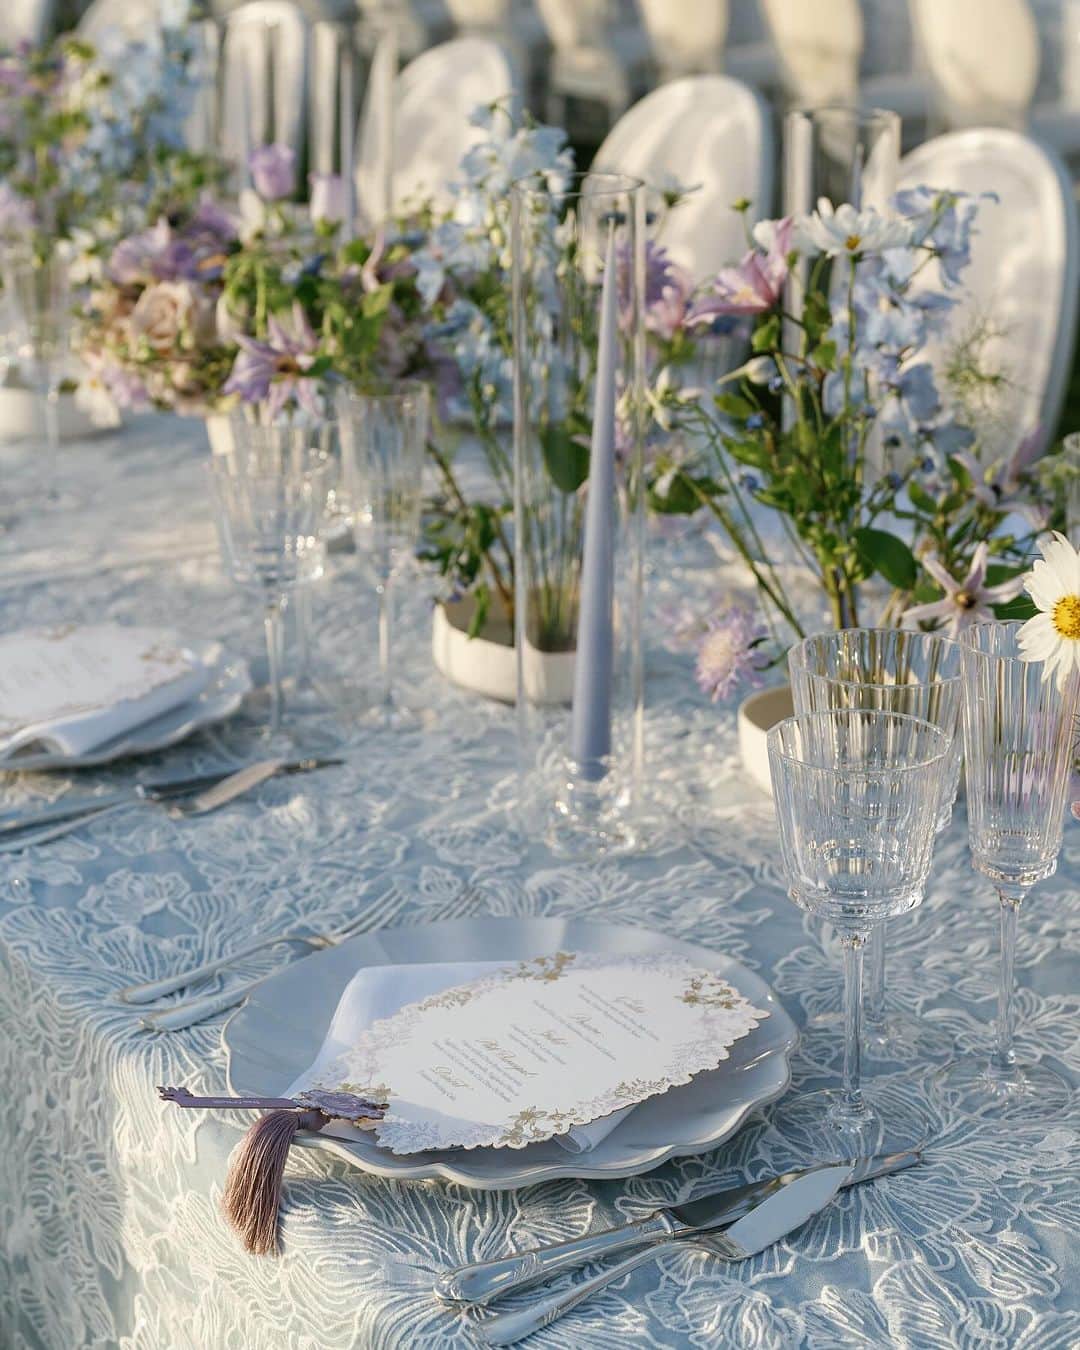 Veronica Halimさんのインスタグラム写真 - (Veronica HalimInstagram)「Sophie & David's wedding day was effortlessly soft and romantic with Parisian influences. Light colors of sage, French green, lilac, French blue, and muted dusty blue were infused in the decor in a way that remained classic — achieving a timeless yet stately aesthetic.  @capucineatelierfloral exceptionally complemented the aesthetic with gorgeous blooms that elevated the decor while the menus and escort display by @truffypi beautifully enhanced the Parisian elements.  Planning and Design @laurynprattes | Photography @abbyjiu | Venue @chateau_de_villette | Caterer @grandchemintraiteur | Beauty Team @alesiasolo_muah | Florals @capucineatelierfloral | Stationery @truffypi | Rentals @nuagedesignsinc @theonicollection @maison_options | Decor @atawaevent | Cake @syniesparis | Entertainment @damien.keys | Transportation @blackroadlimo | Bride @sgeschwind13   #pariswedding #parisfrance #chateaudevillette #chateaudevillettewedding #realbride #francewedding #weddingvenues #franceweddingvenue #luxuryeventplanning #destinationwedding #weddingflowers #weddingtable #luxurywedding #weddingdetails #weddingdecor #receptiondecor #weddingday #weddingideas #weddingdecoration #weddinginspiration #weddingcenterpiece #weddingflowers #weddingtent #gardenwedding #tentedwedding #outdoorwedding #eventdesign #weddingphotography #eventdecor #weddingwednesday」10月14日 4時09分 - truffypi